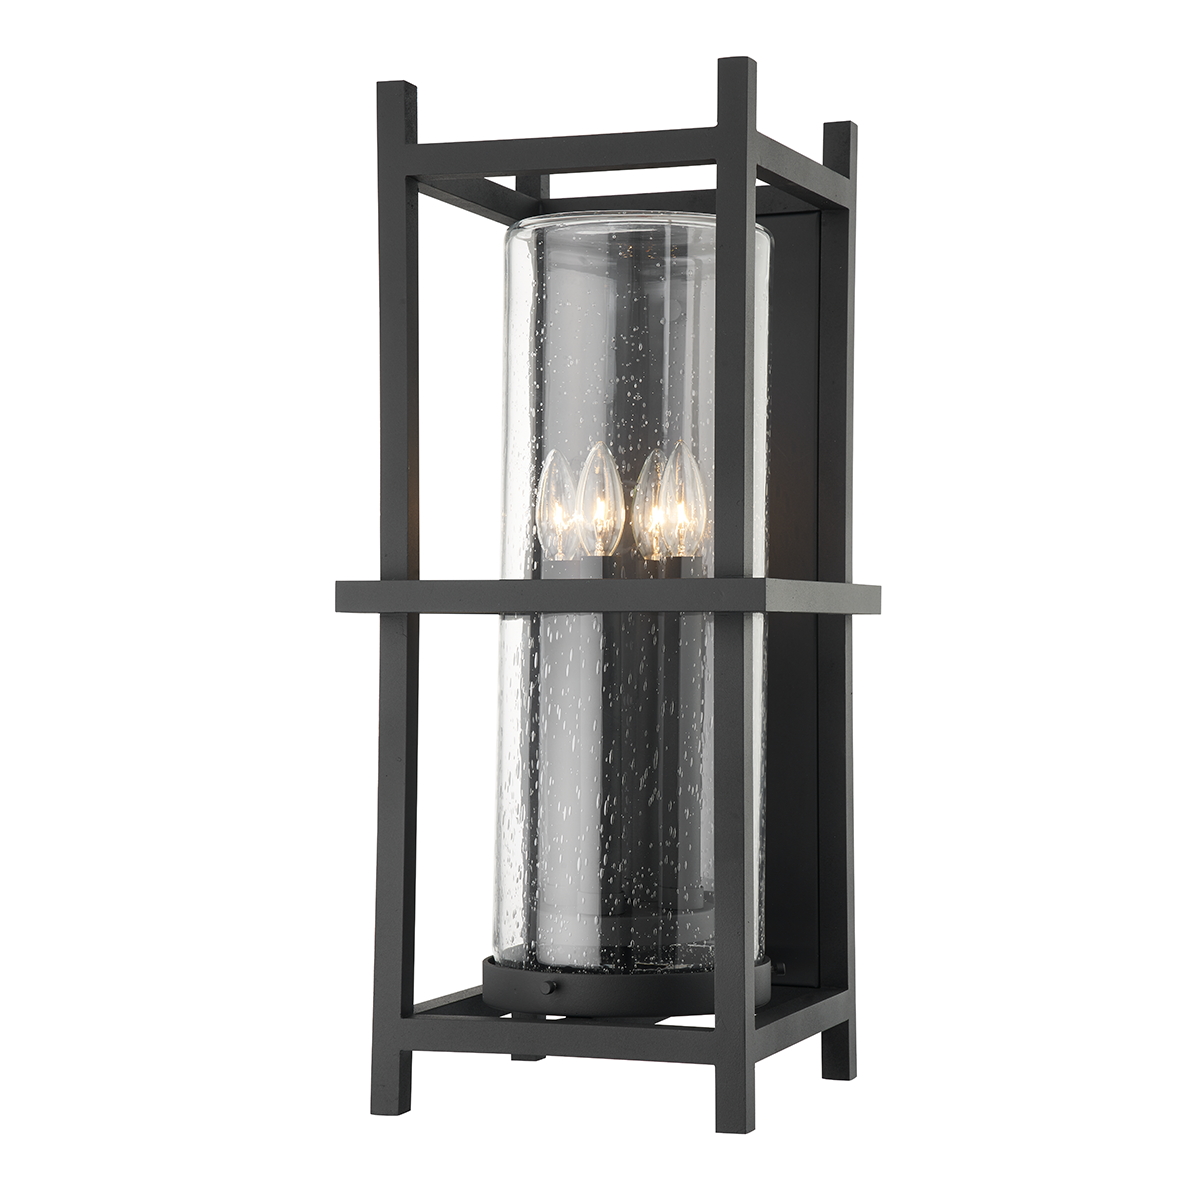 Troy Lighting 4 LIGHT LARGE EXTERIOR WALL SCONCE B7504 Outdoor l Wall Troy Lighting TEXTURED BLACK  